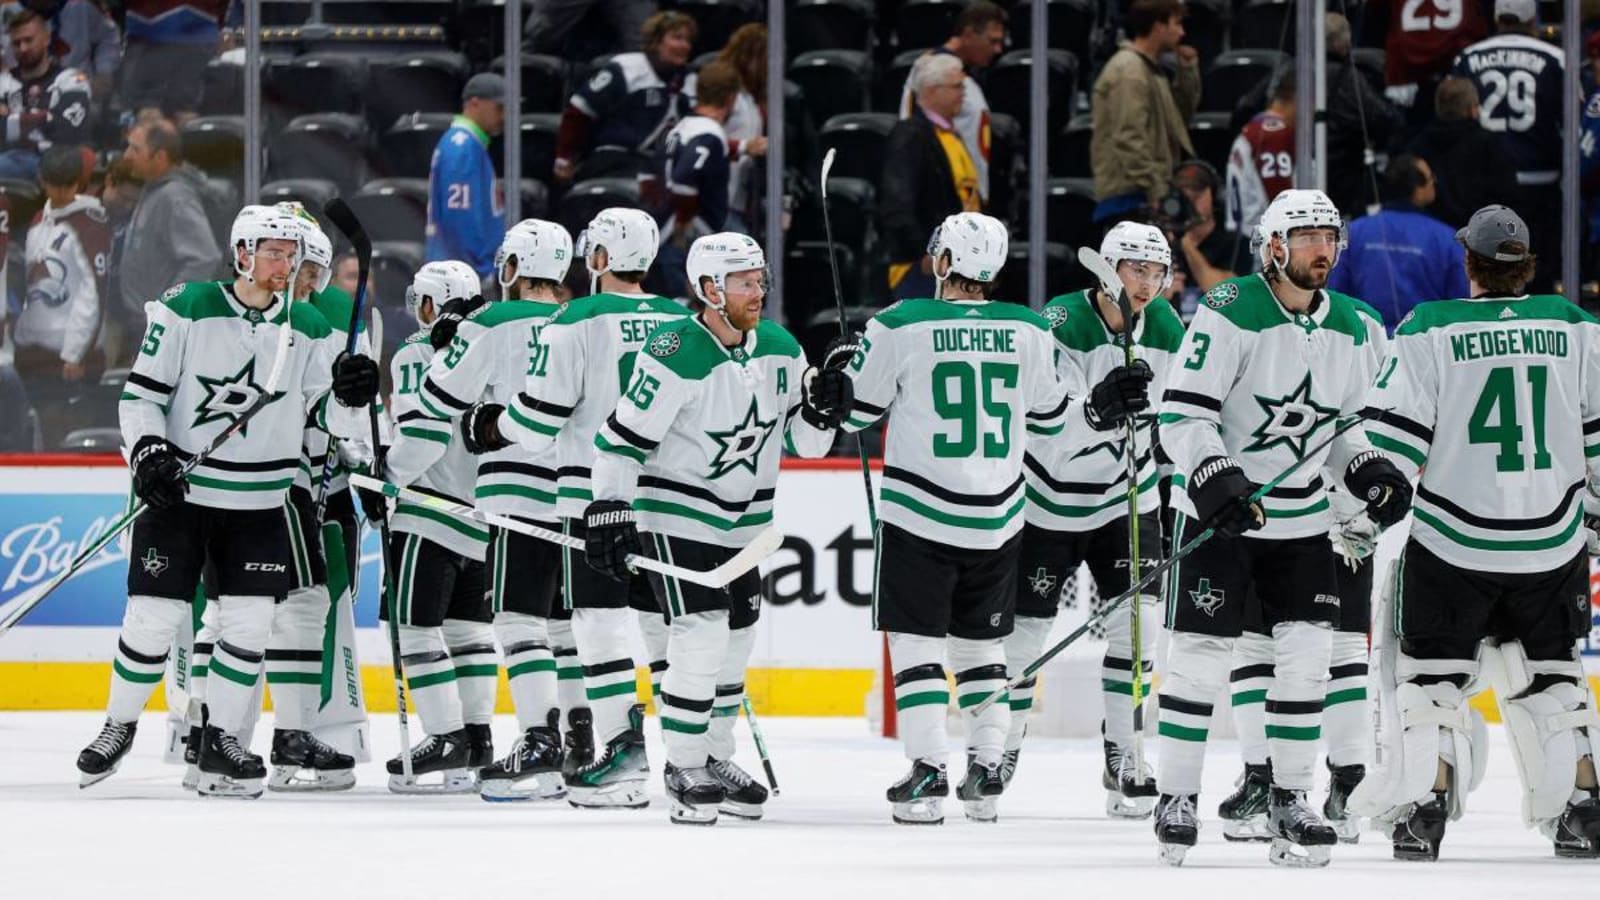 What stands out about the Dallas Stars’ playoff offense